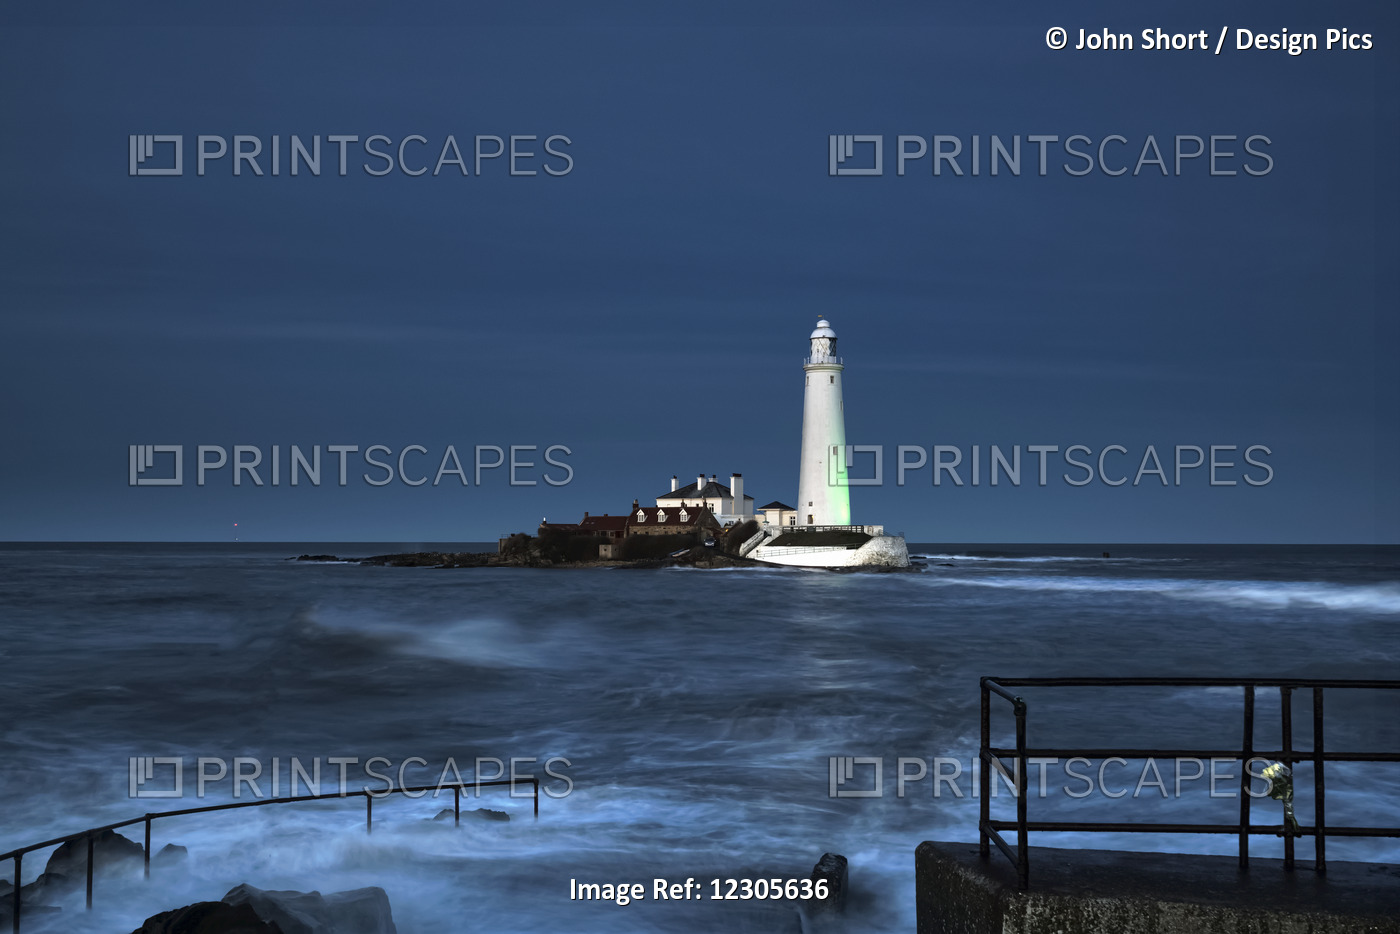 St. Mary's Island And Lighthouse; Whitley Bay, Tyne And Wear, England